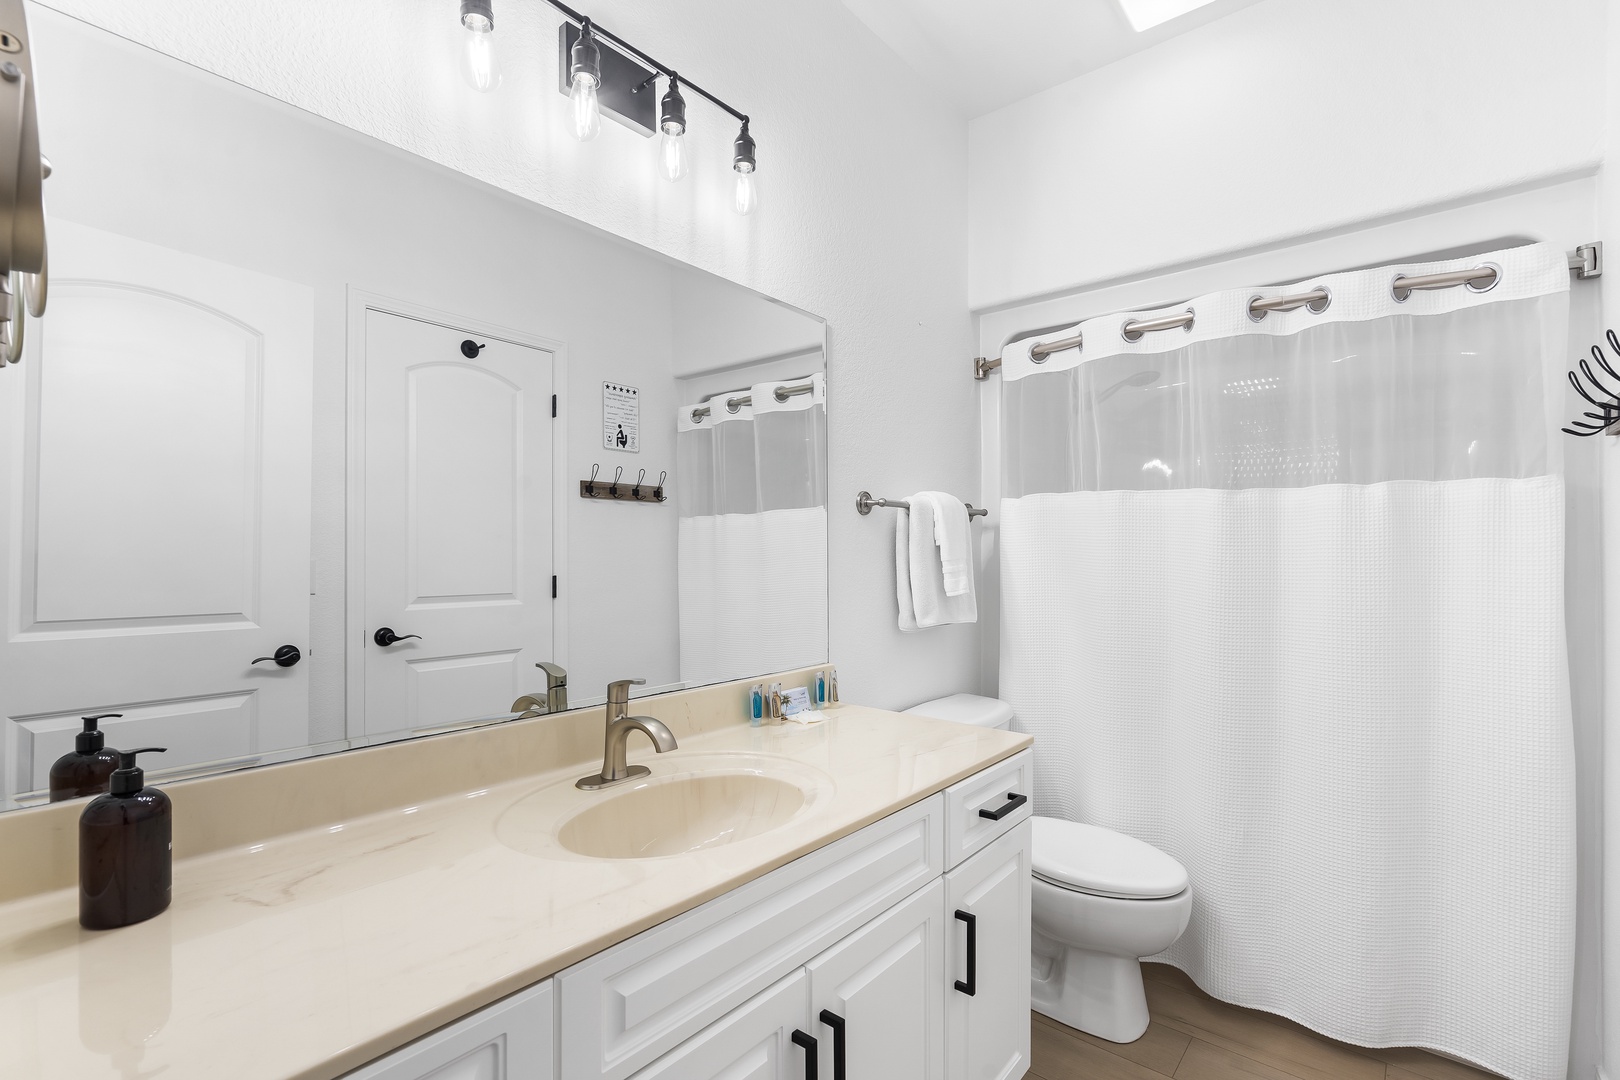 The bunk room ensuite offers an oversized single vanity and shower tub combo